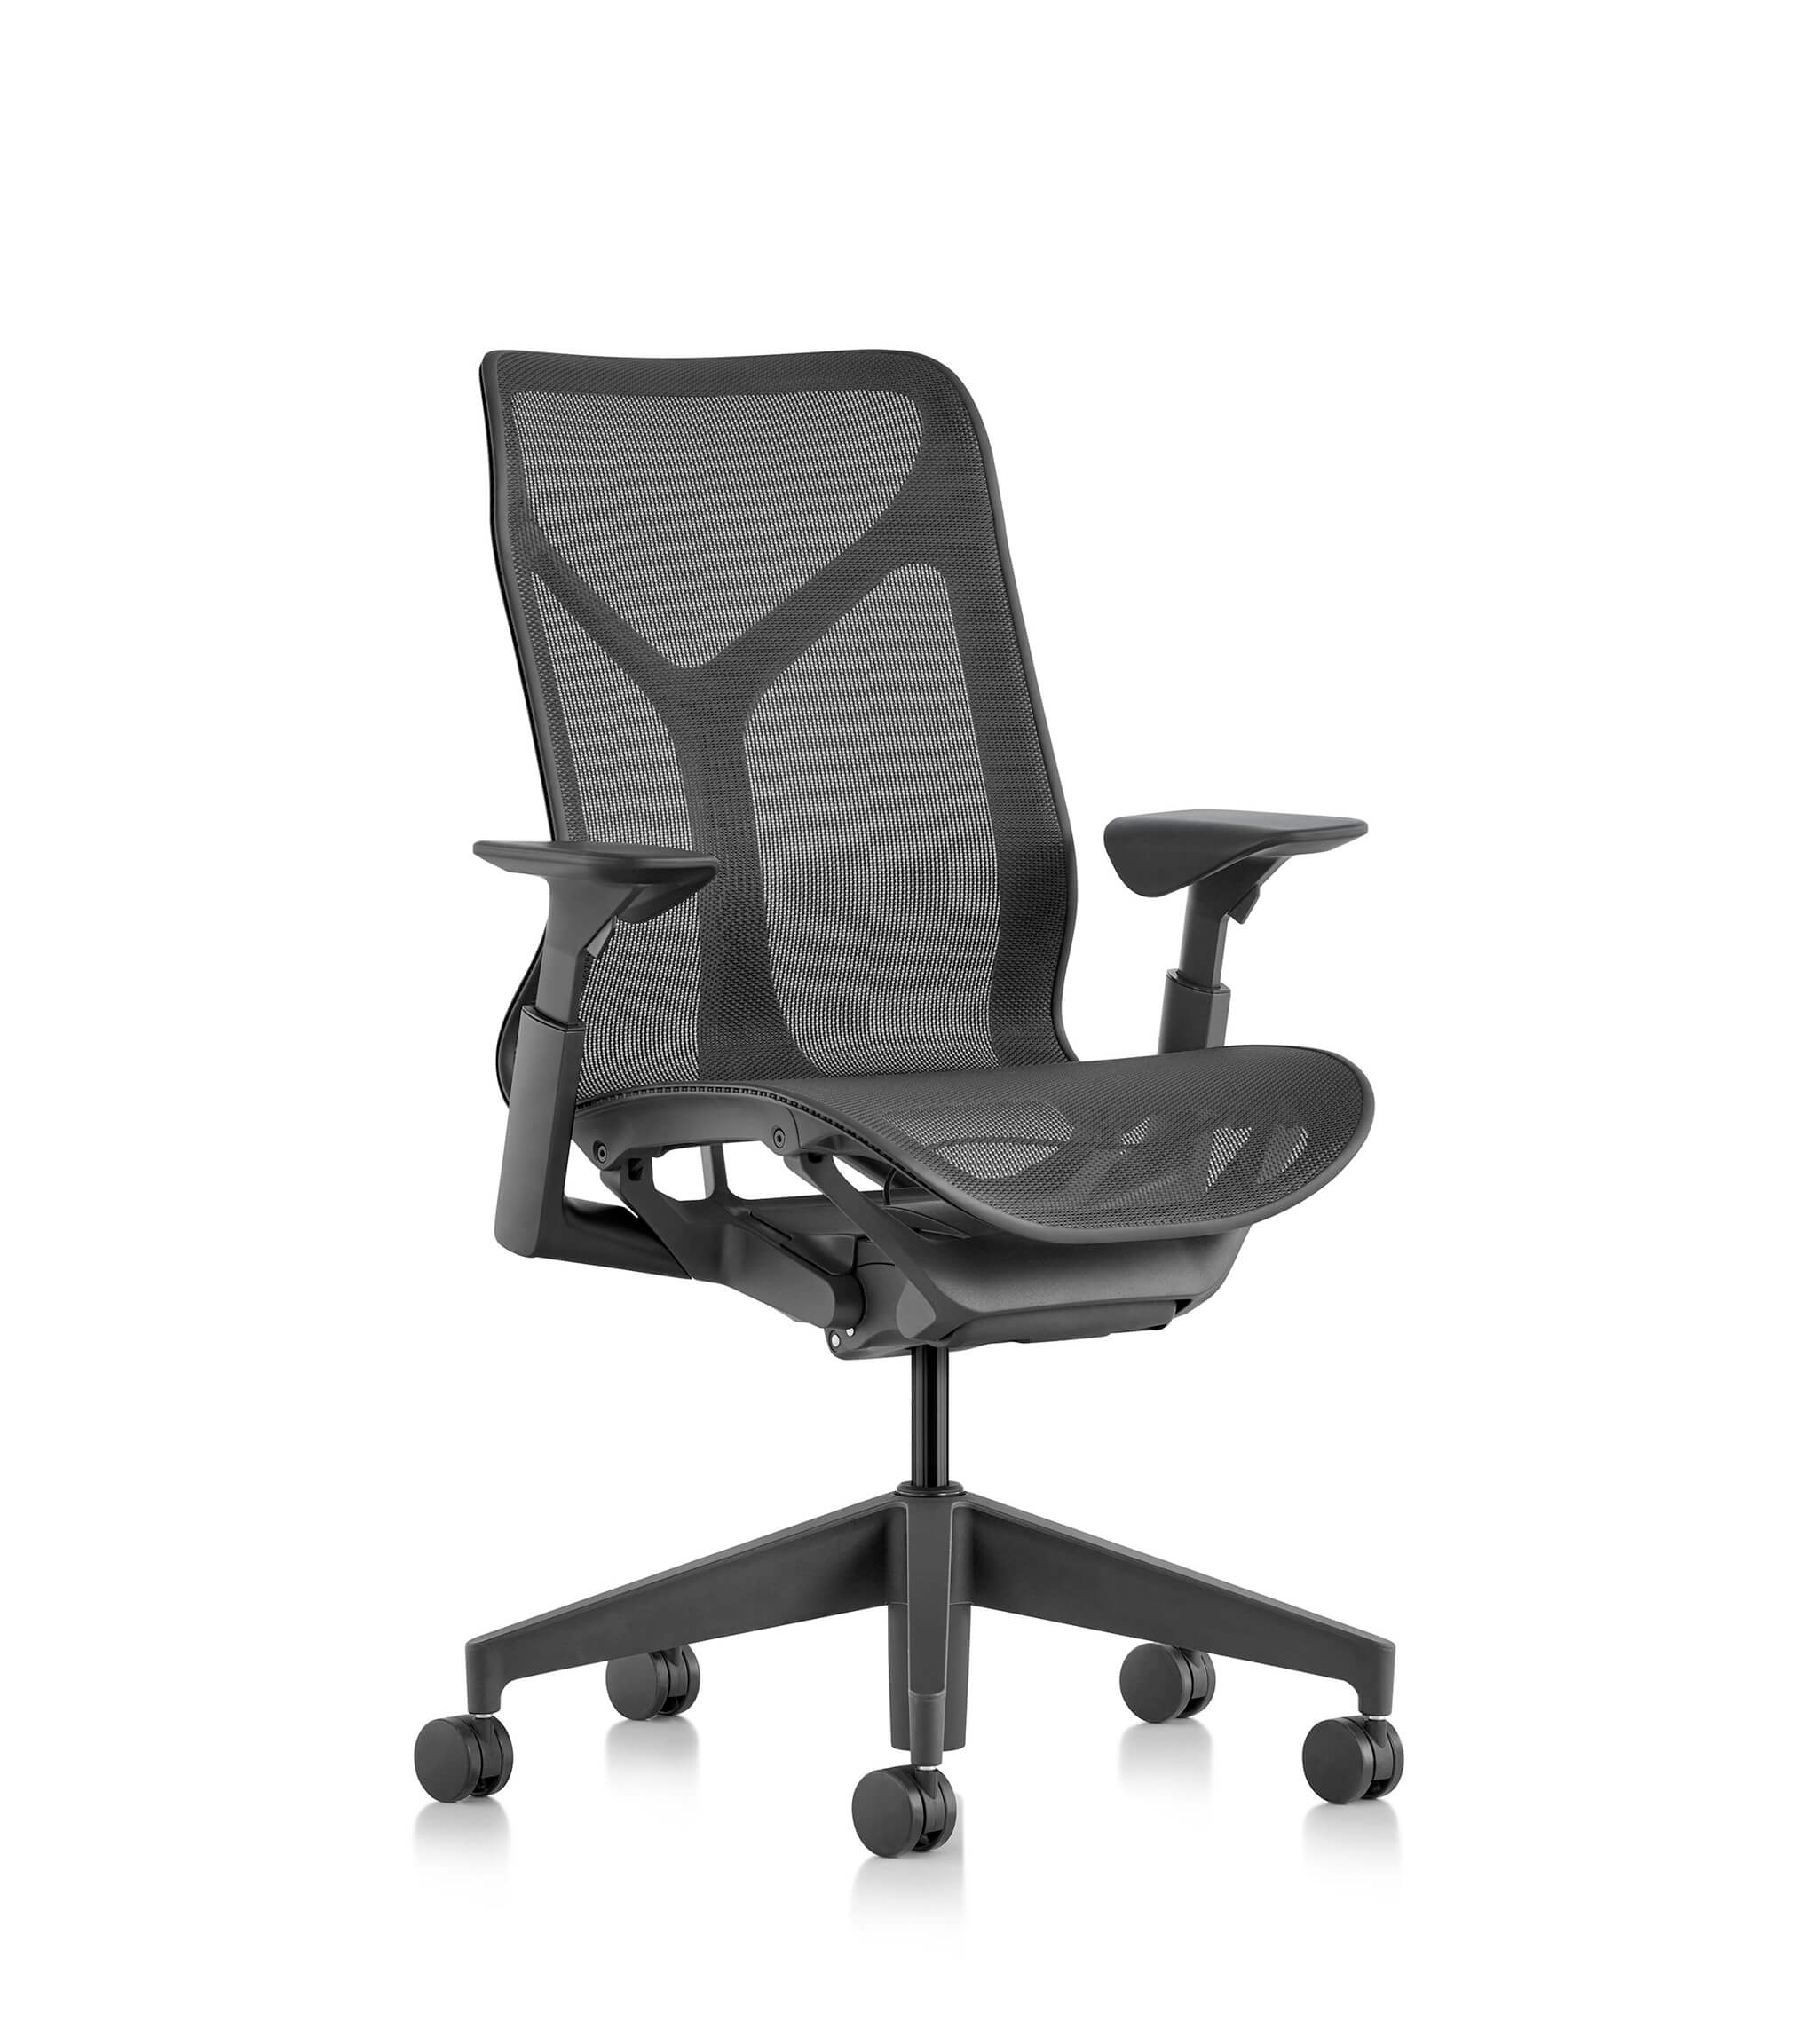 cosm chair by Herman miller on black colour side view in a white background